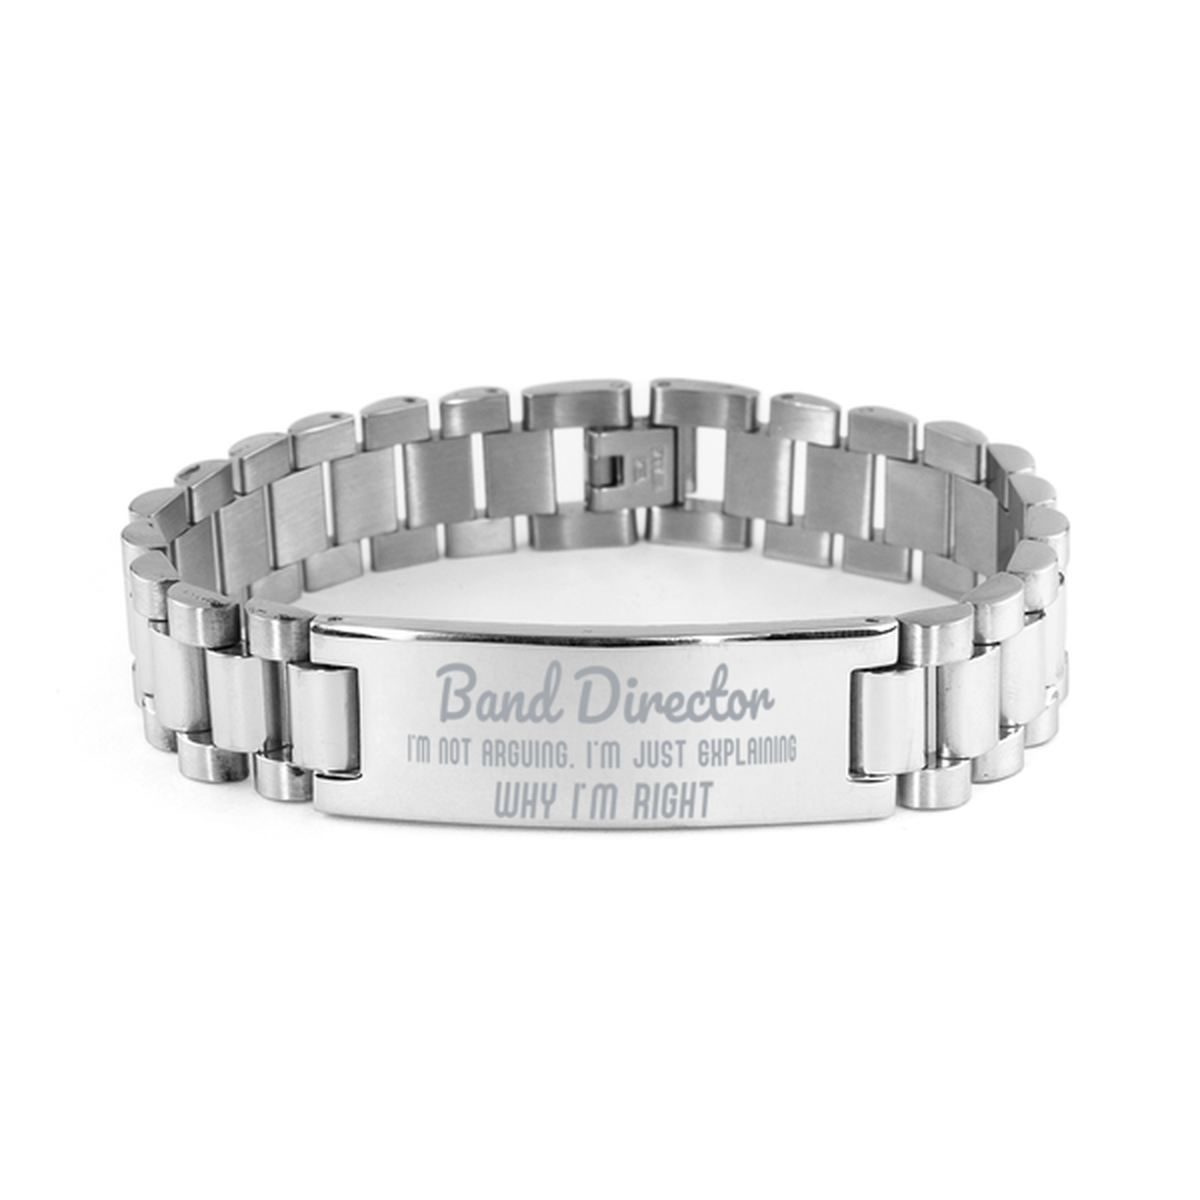 Band Director I'm not Arguing. I'm Just Explaining Why I'm RIGHT Ladder Stainless Steel Bracelet, Graduation Birthday Christmas Band Director Gifts For Band Director Funny Saying Quote Present for Men Women Coworker